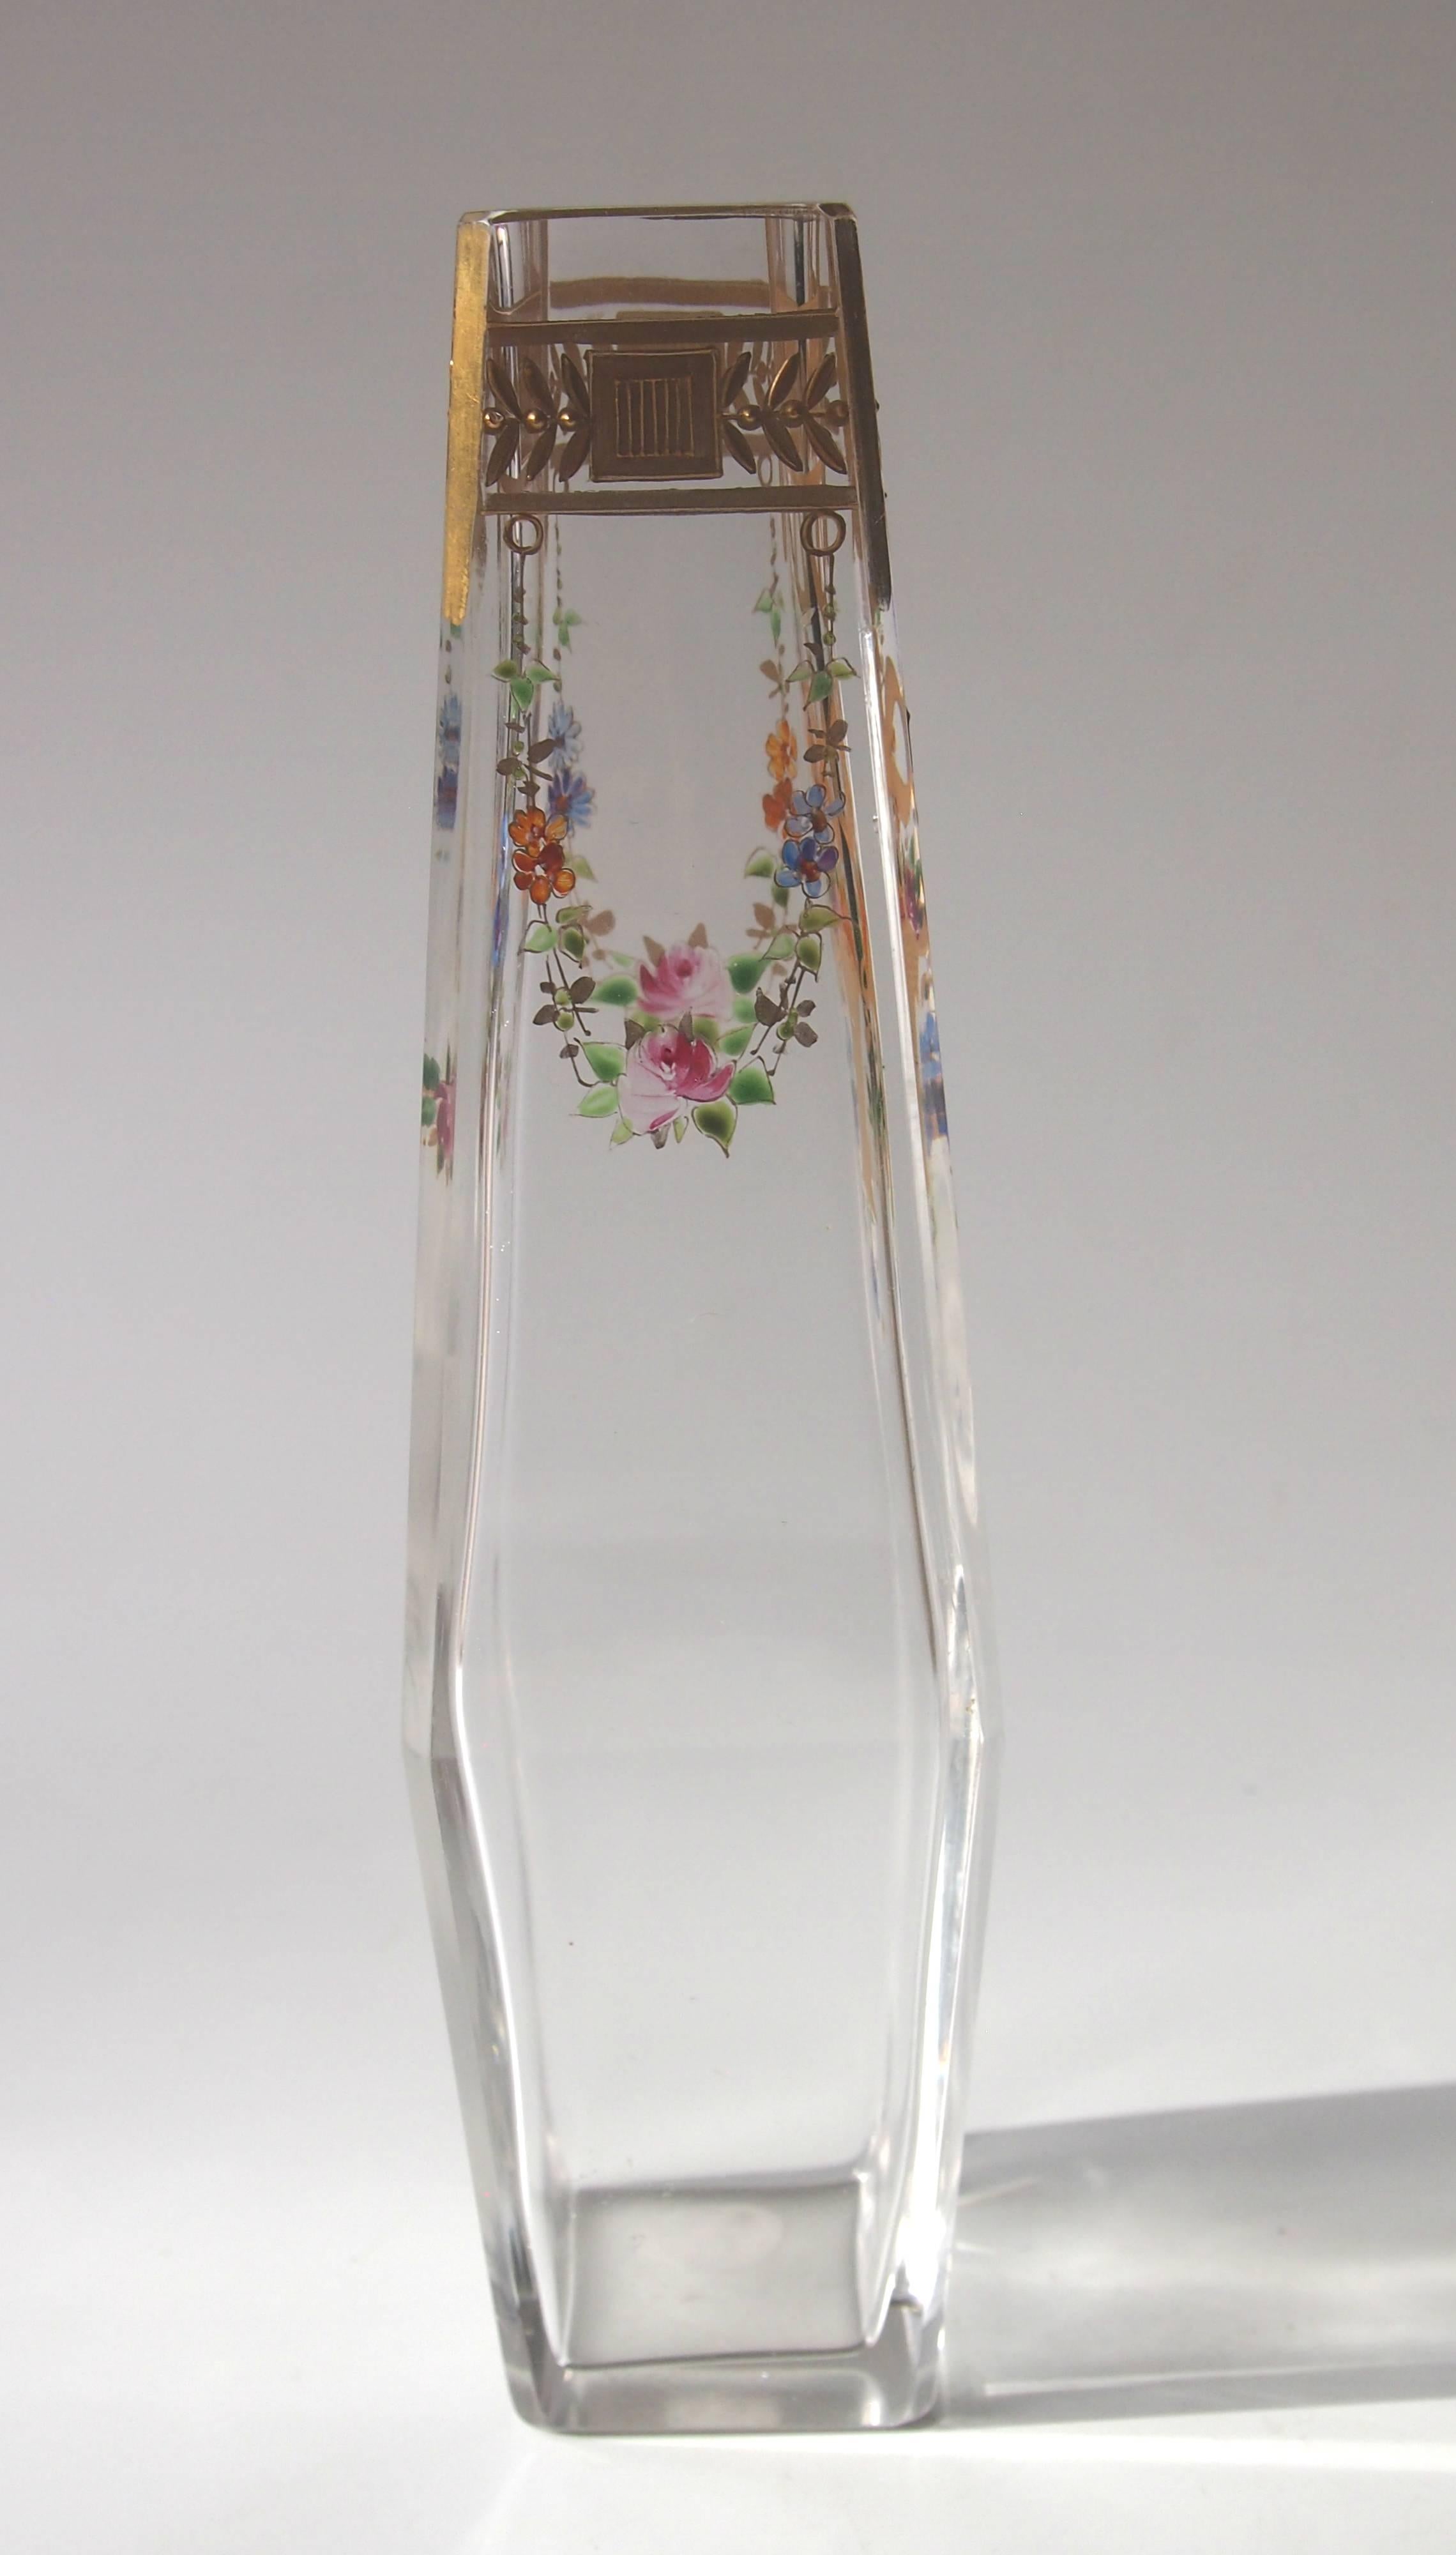 Bohemian Victorian Harrach Enameled Glass Vase with Basket of Flowers circa 1895 In Good Condition For Sale In London, GB